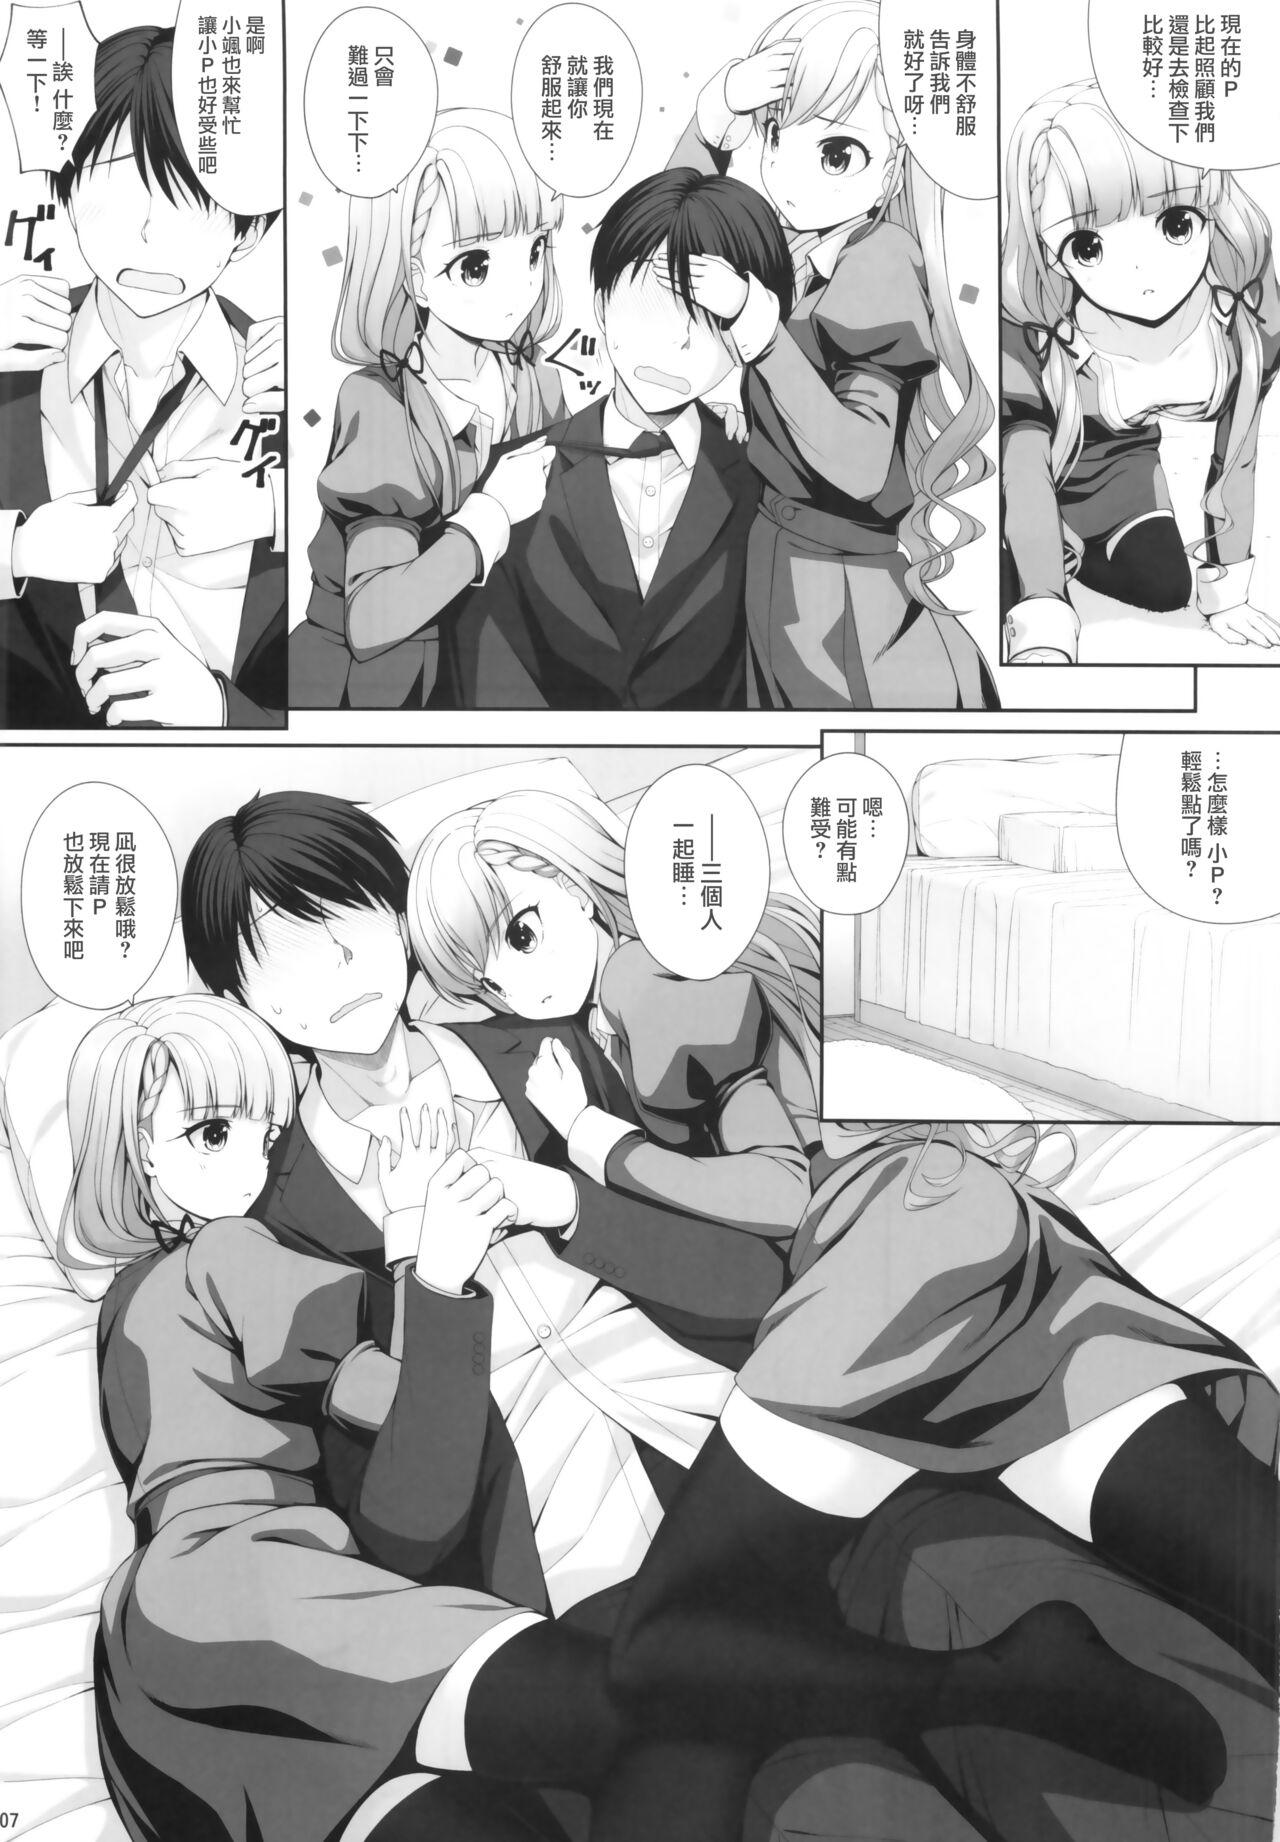 Caught SHORTY×SHORTY - The idolmaster Foursome - Page 6